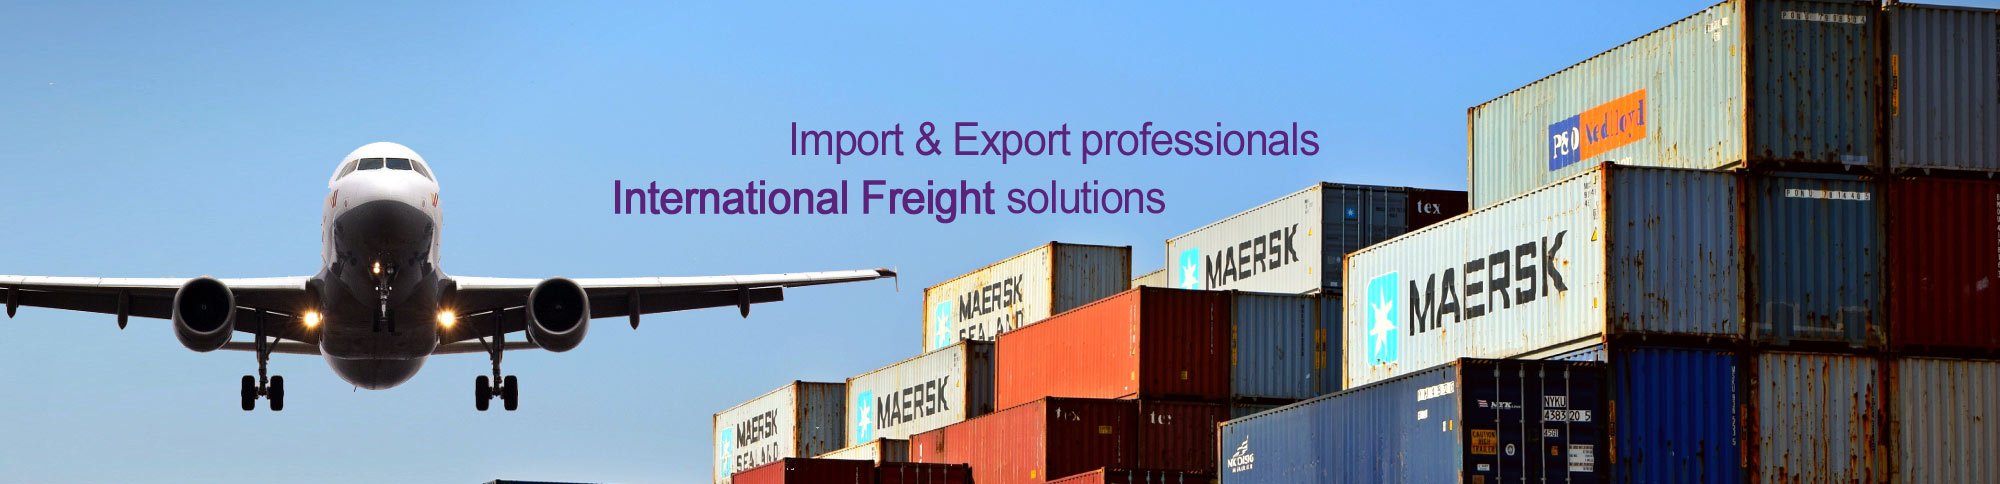 Import & Export professionals. International Freight Solutions